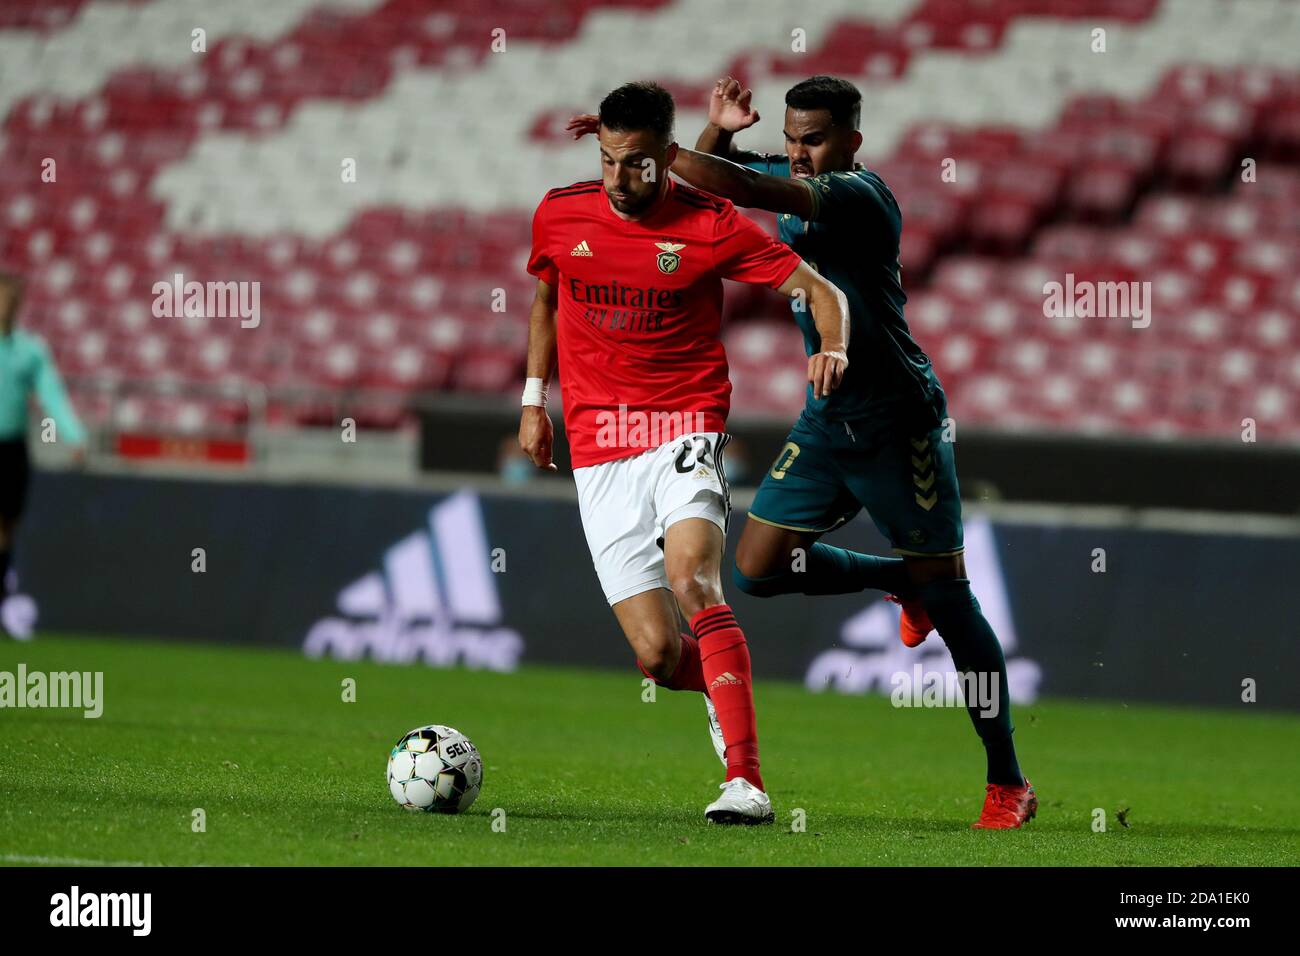 Lisbon, Portugal. 8th Nov, 2020. Andreas Samaris of SL Benfica (L) vies with Wenderson Galeno of SC Braga during the Portuguese League football match between SL Benfica and SC Braga at the Luz stadium in Lisbon, Portugal on November 8, 2020. Credit: Pedro Fiuza/ZUMA Wire/Alamy Live News Stock Photo